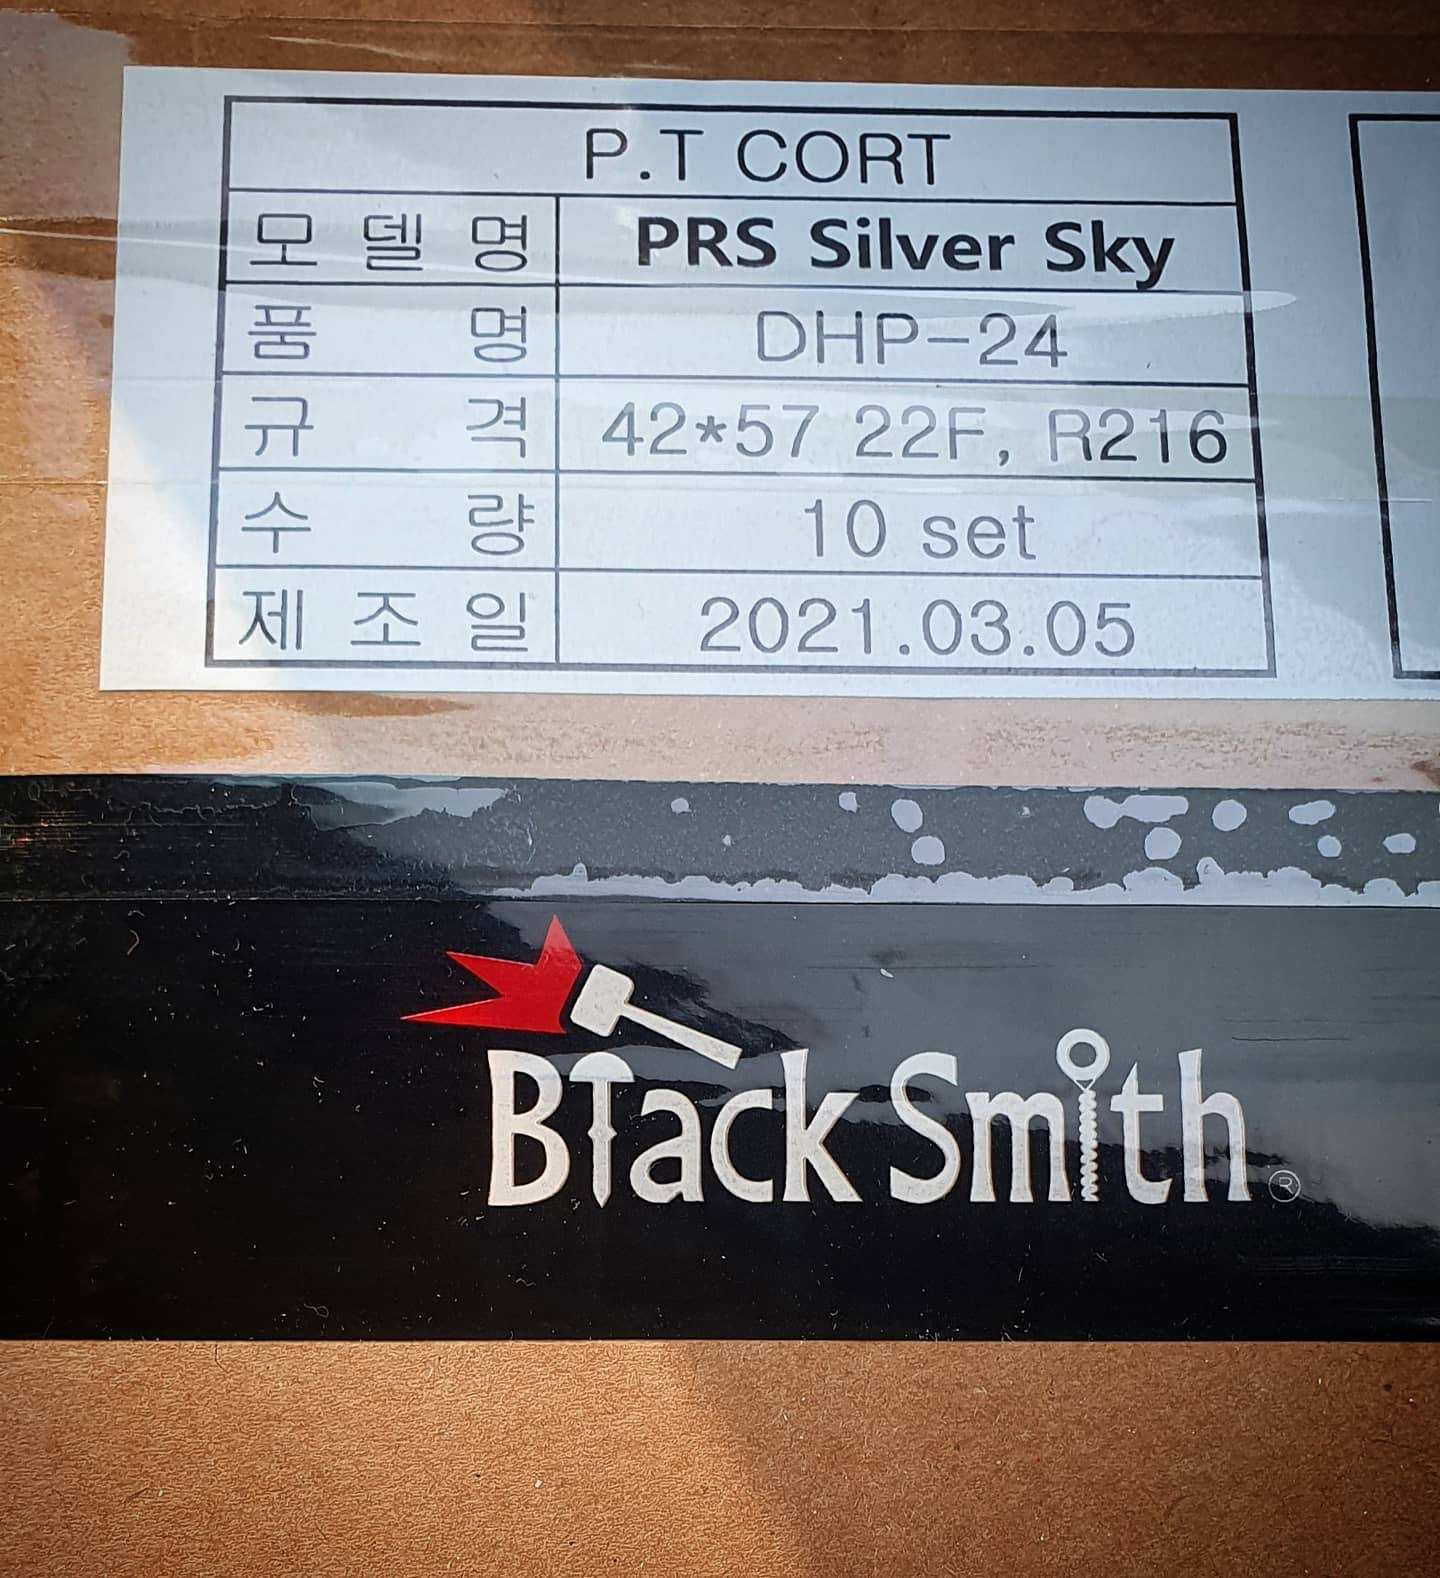 BlackSmith Strings has seemingly confirmed the existence of an SE version of the PRS Silver Sky